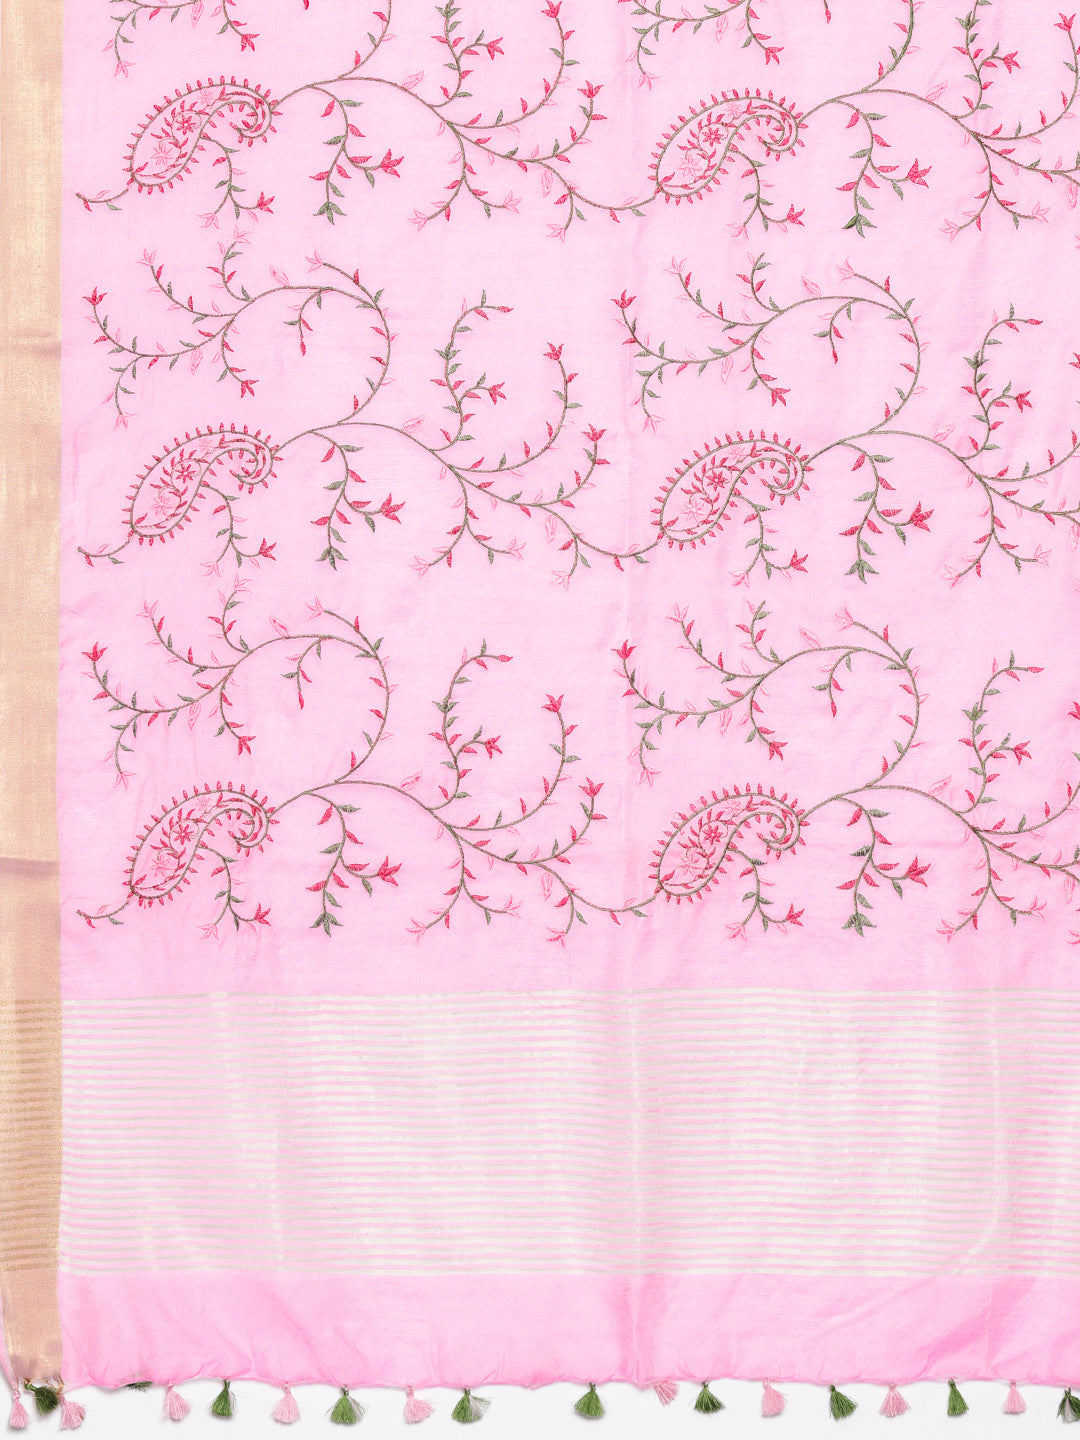 Kalakari India Kota Silk Embroidered Saree With Blouse ALBGSA0177-Saree-Kalakari India-ALBGSA0177-Bollywood, Geographical Indication, Hand Crafted, Heritage Prints, Natural Dyes, Sarees, South Silk, Sustainable Fabrics, Uppada Silk, Woven-[Linen,Ethnic,wear,Fashionista,Handloom,Handicraft,Indigo,blockprint,block,print,Cotton,Chanderi,Blue, latest,classy,party,bollywood,trendy,summer,style,traditional,formal,elegant,unique,style,hand,block,print, dabu,booti,gift,present,glamorous,affordable,colle